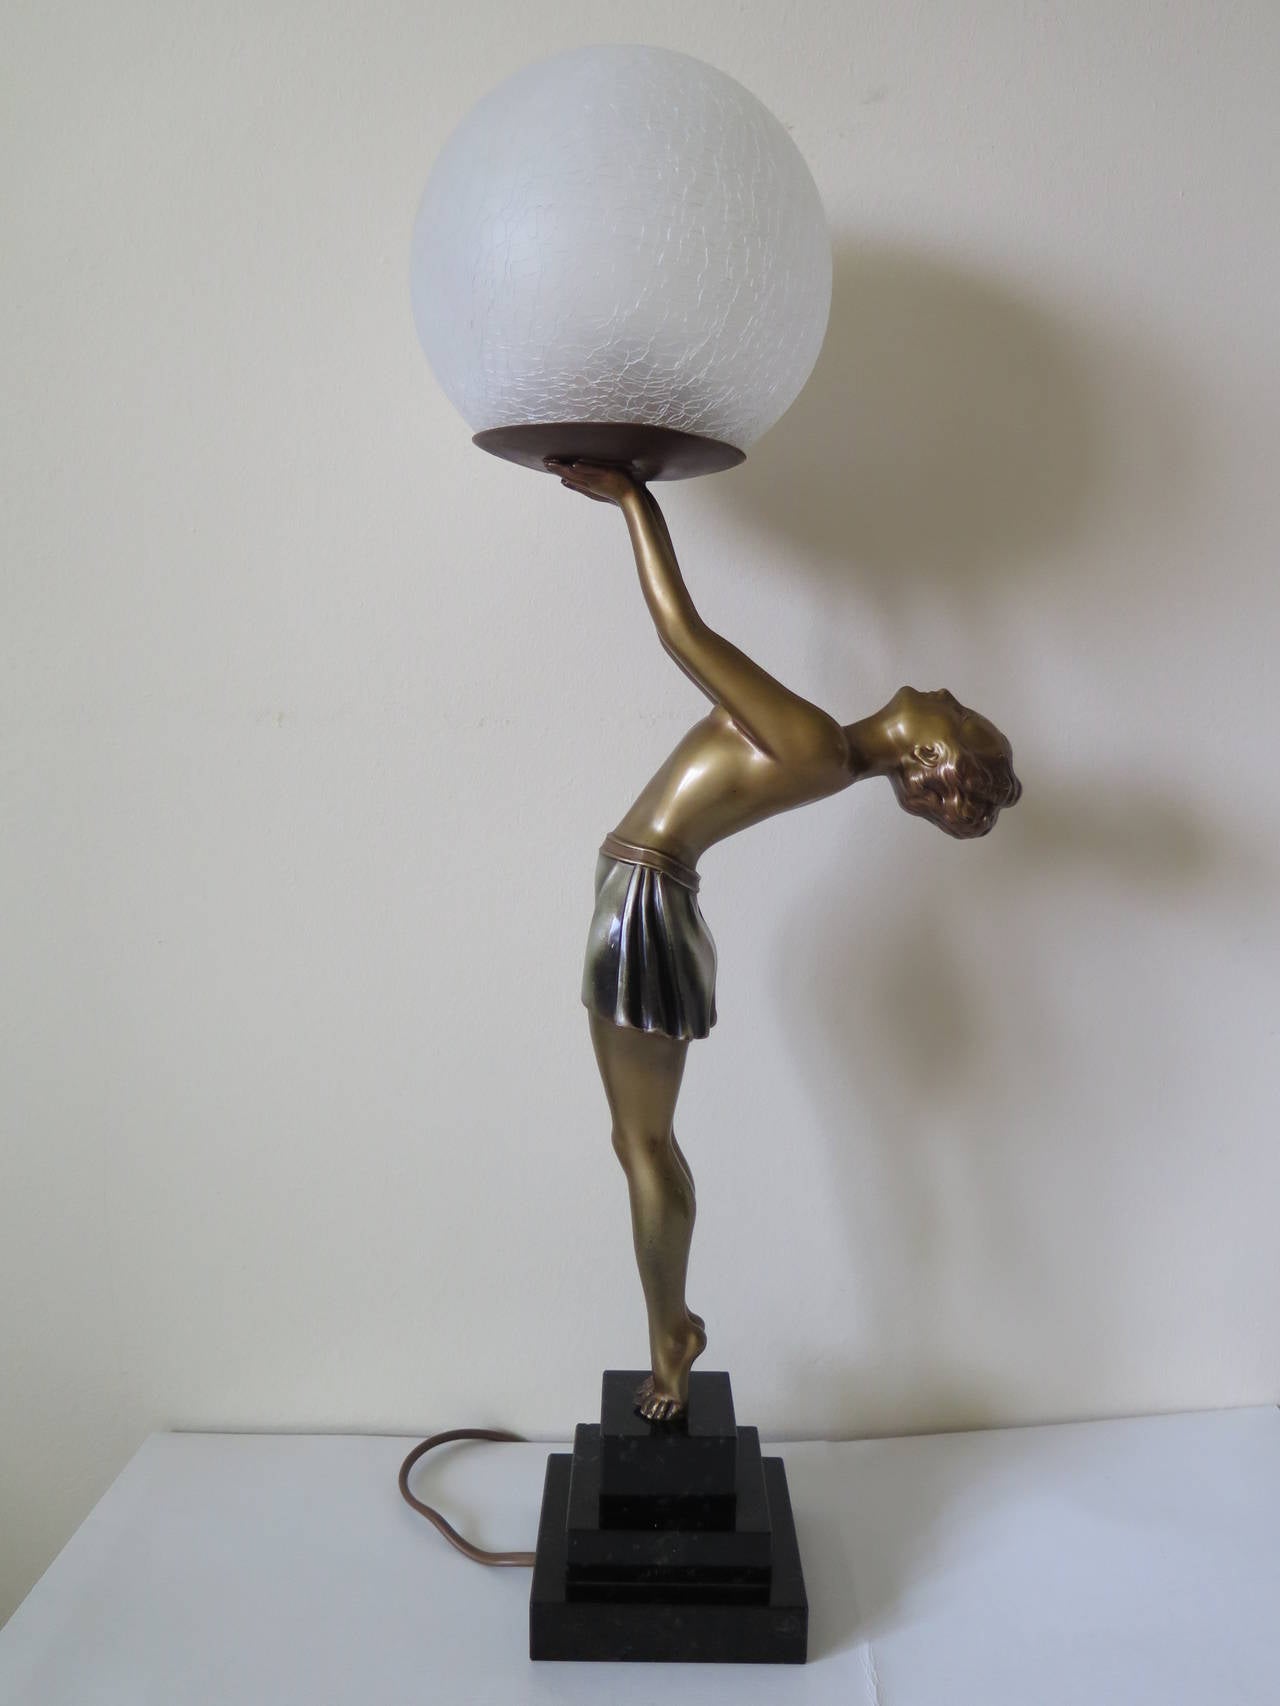 This is a stunning, tall, figurine table lamp of the Biba Lamp Girl after Max Le-Verrier ( 1891-1973), who was a famous French Sculptor, based in Paris.

The item is original to the Art Deco period and we date it to circa 1930.

The figurine is made